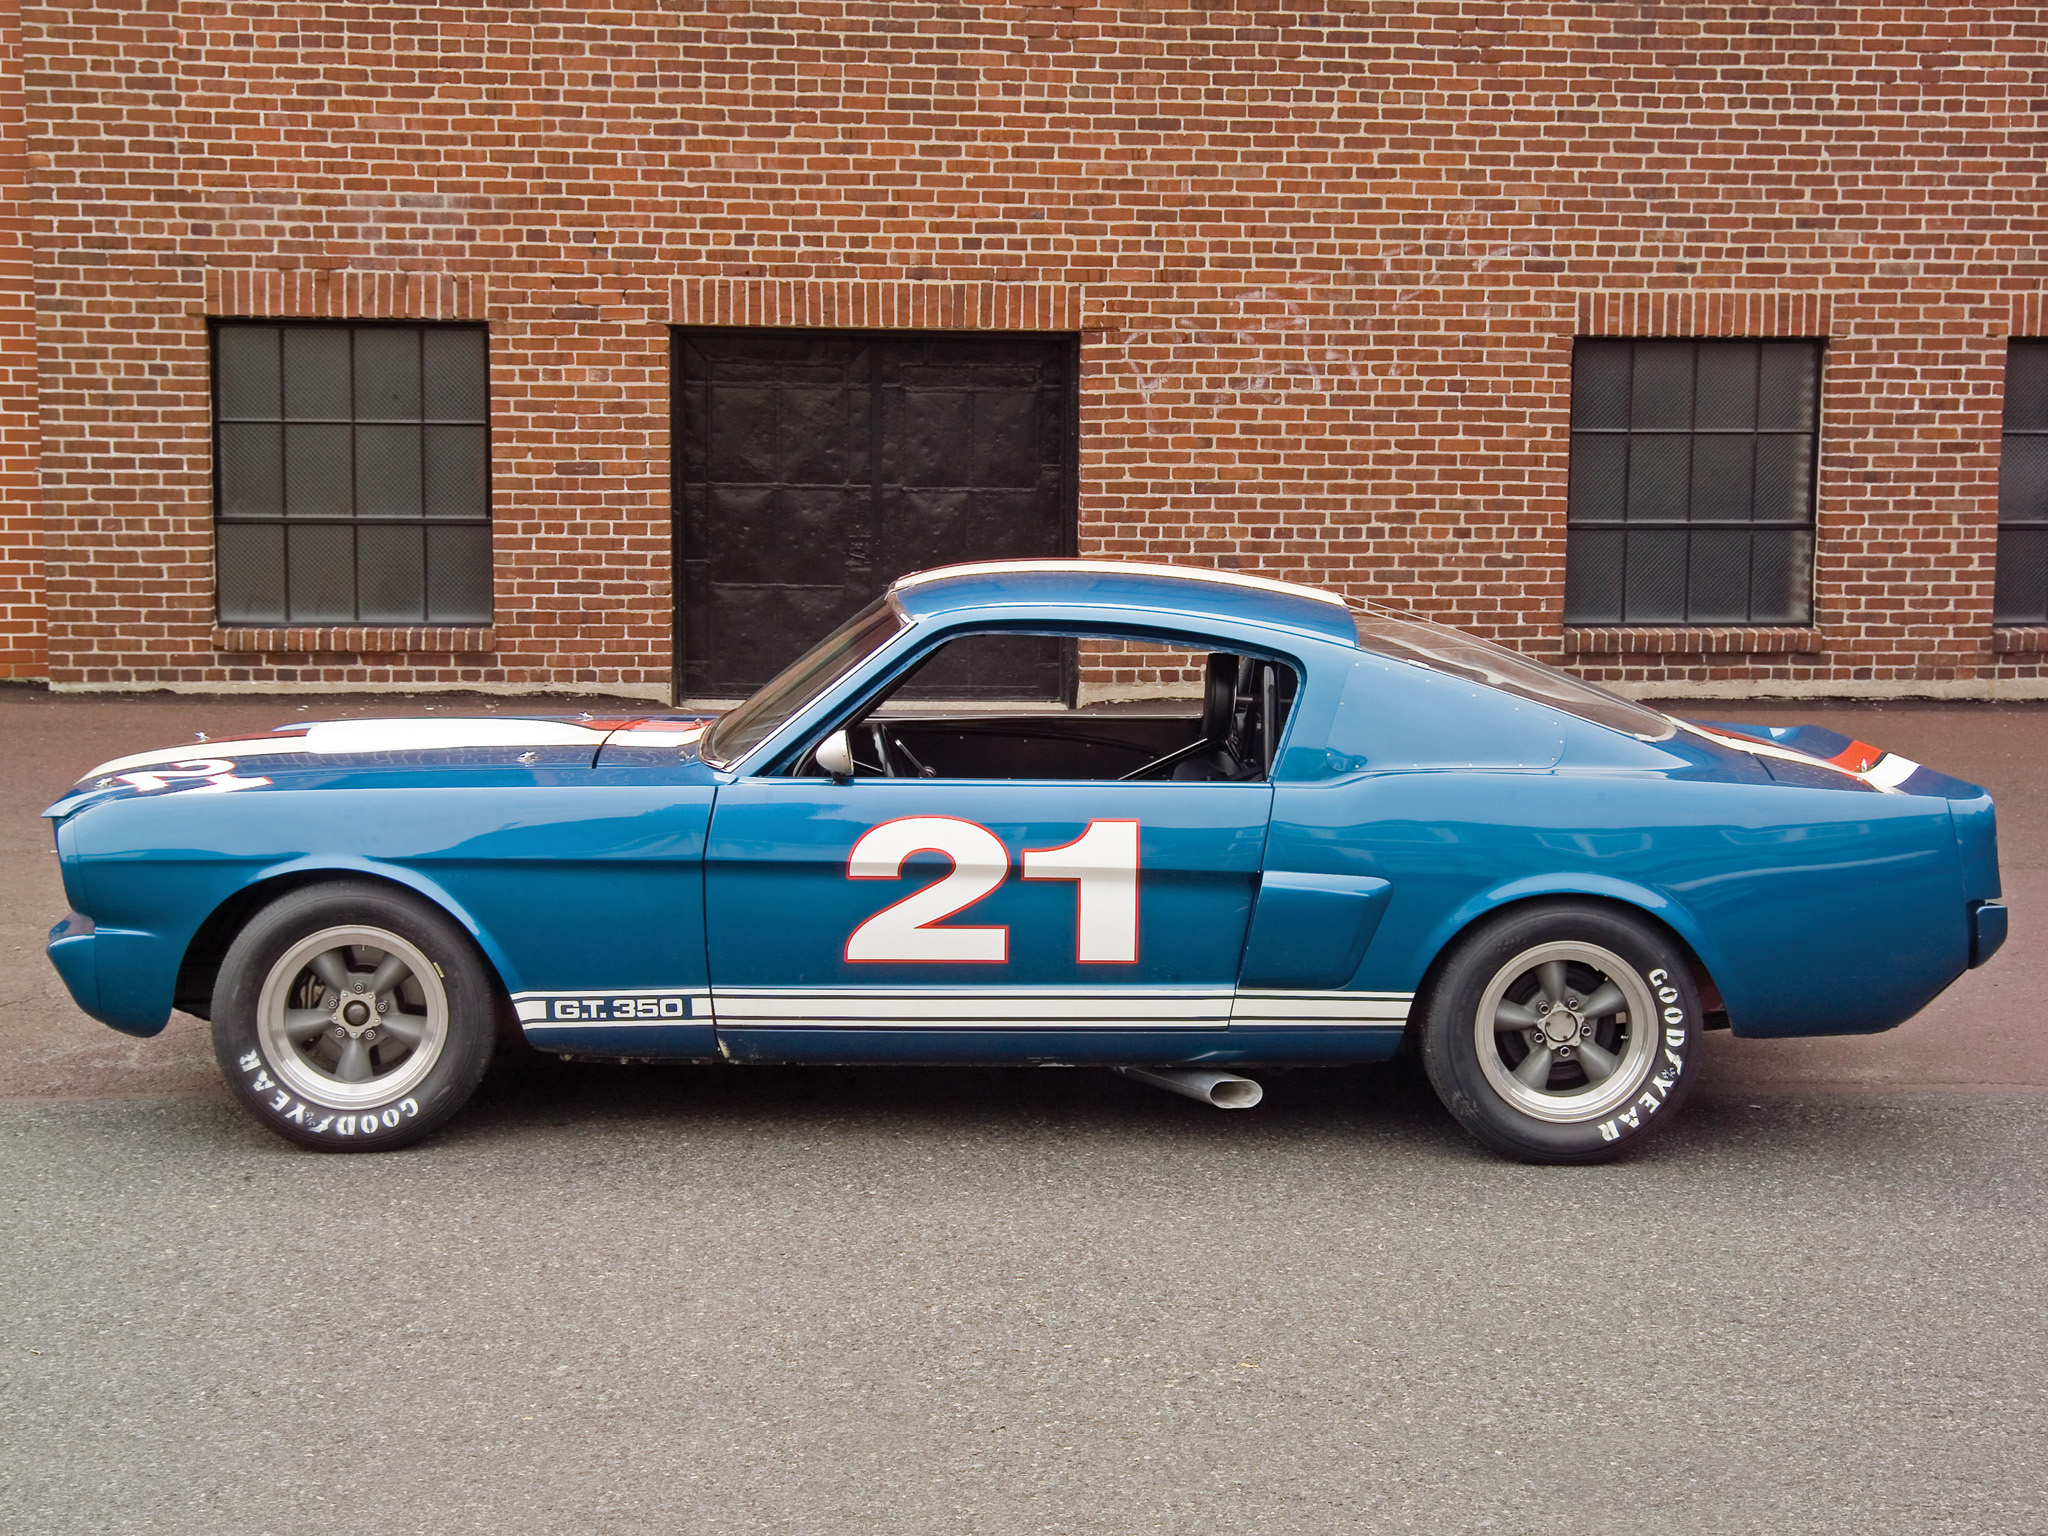 1966, Shelby, Gt350h, Scca, B production, Ford, Mustang, Classic, Muscle, Race, Racing Wallpaper